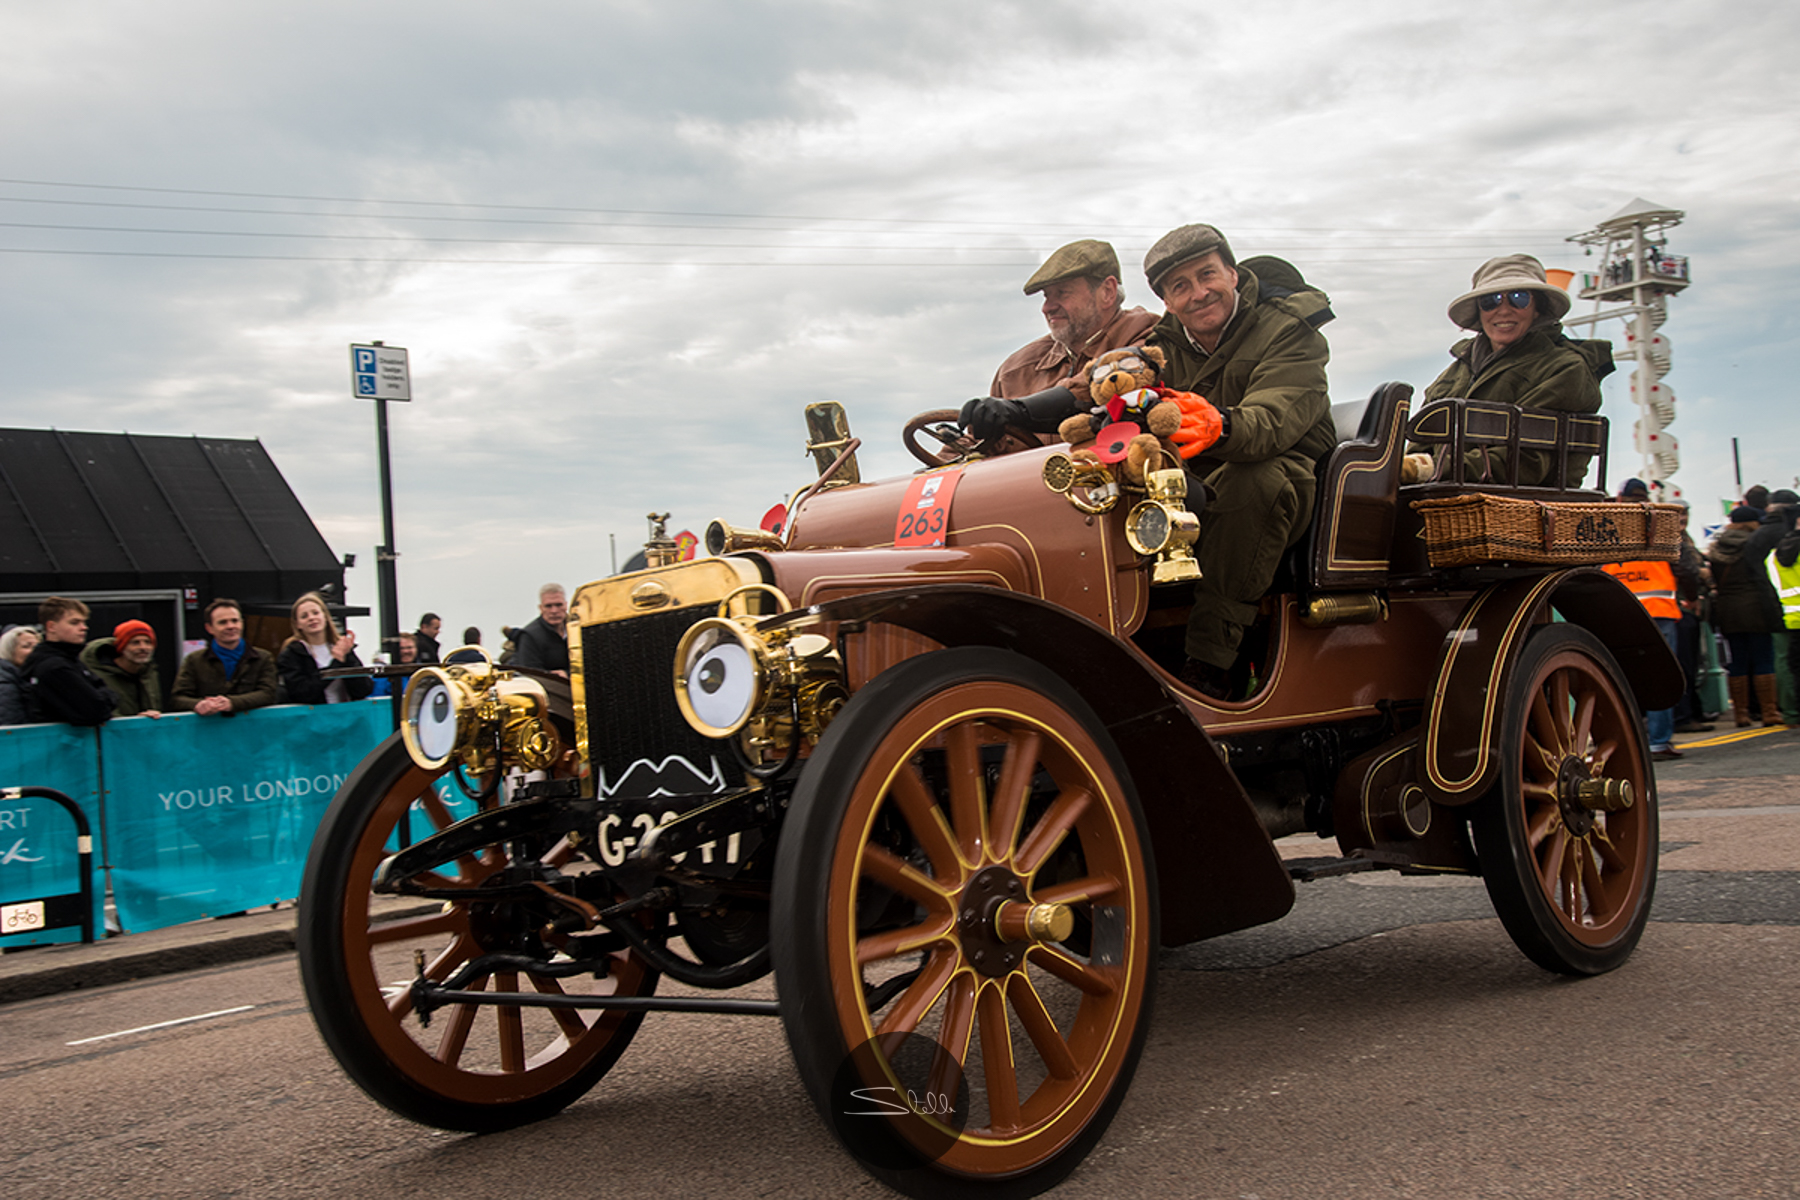  David Pain driving a 1904 Albion 2 Cylinder, 16 HP, with carstache motif in support of Movember and teddy bear mascot. 